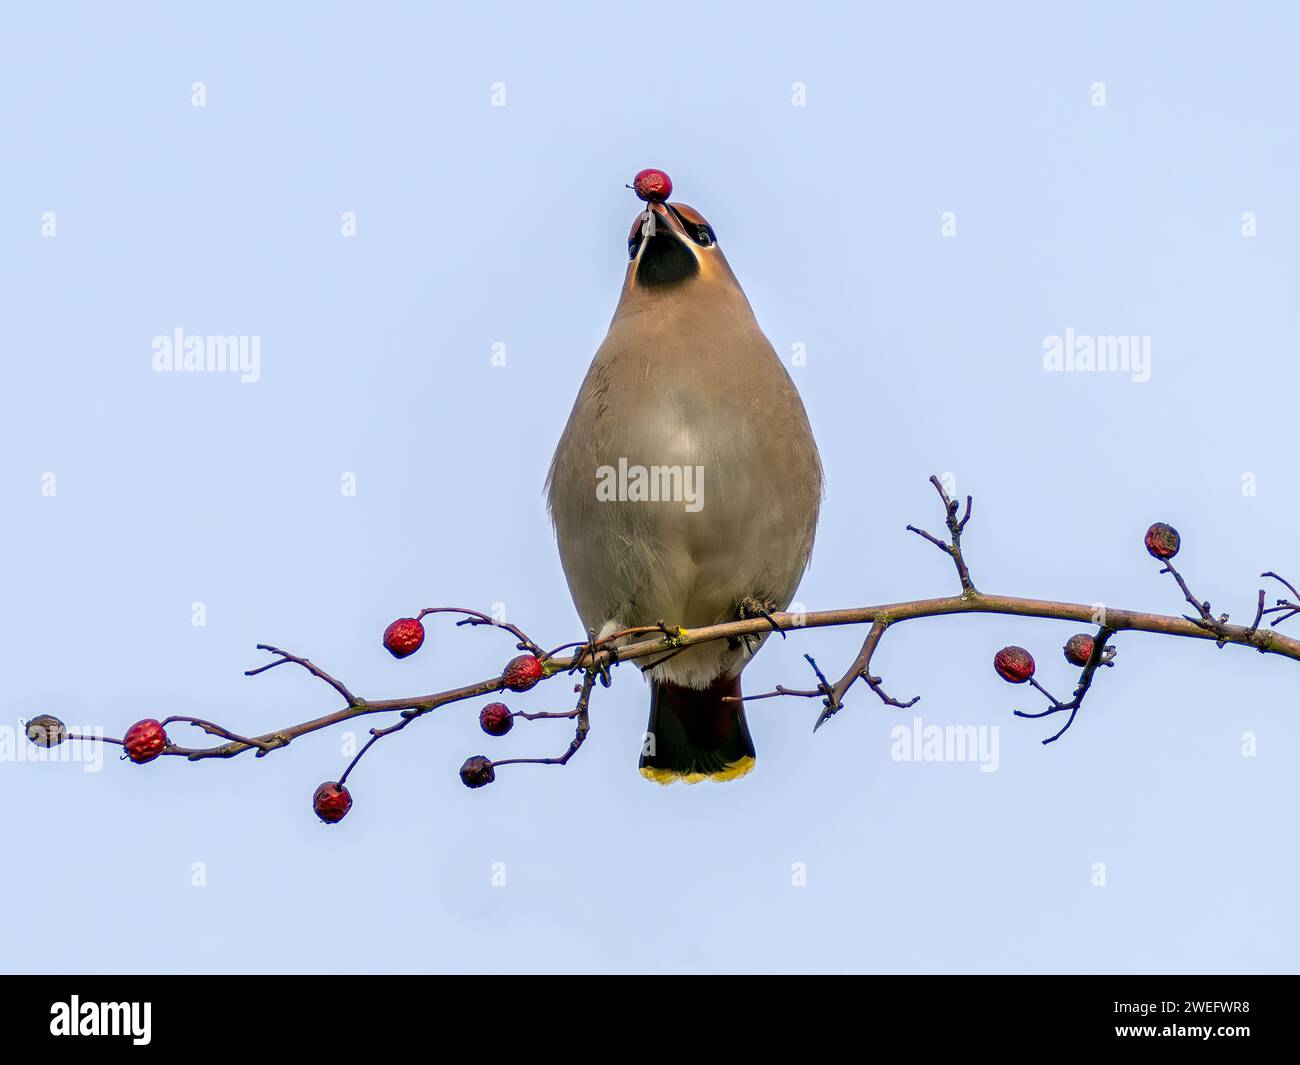 Waxwing, Bombycilla garrulus, perched on tree branch eating red berries Stock Photo